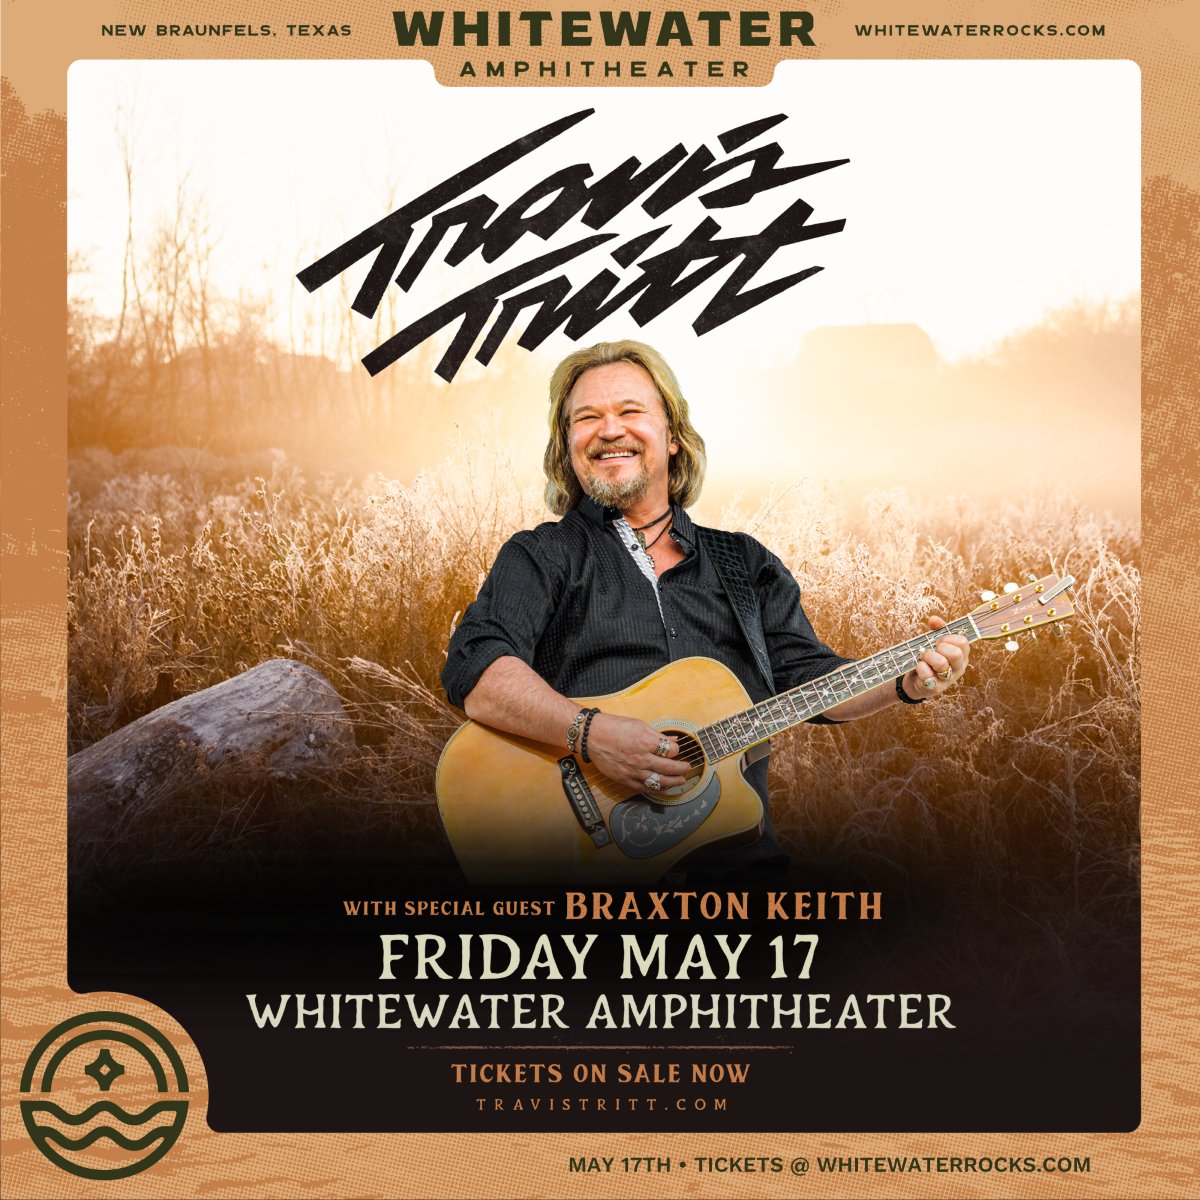 @travistritt and @thebraxtonkeith will be here in just a few weeks y'all! Get your tix: bit.ly/TTWW24 See you there 🤠 #nbtx #travistritt #ontheriverunderthestars